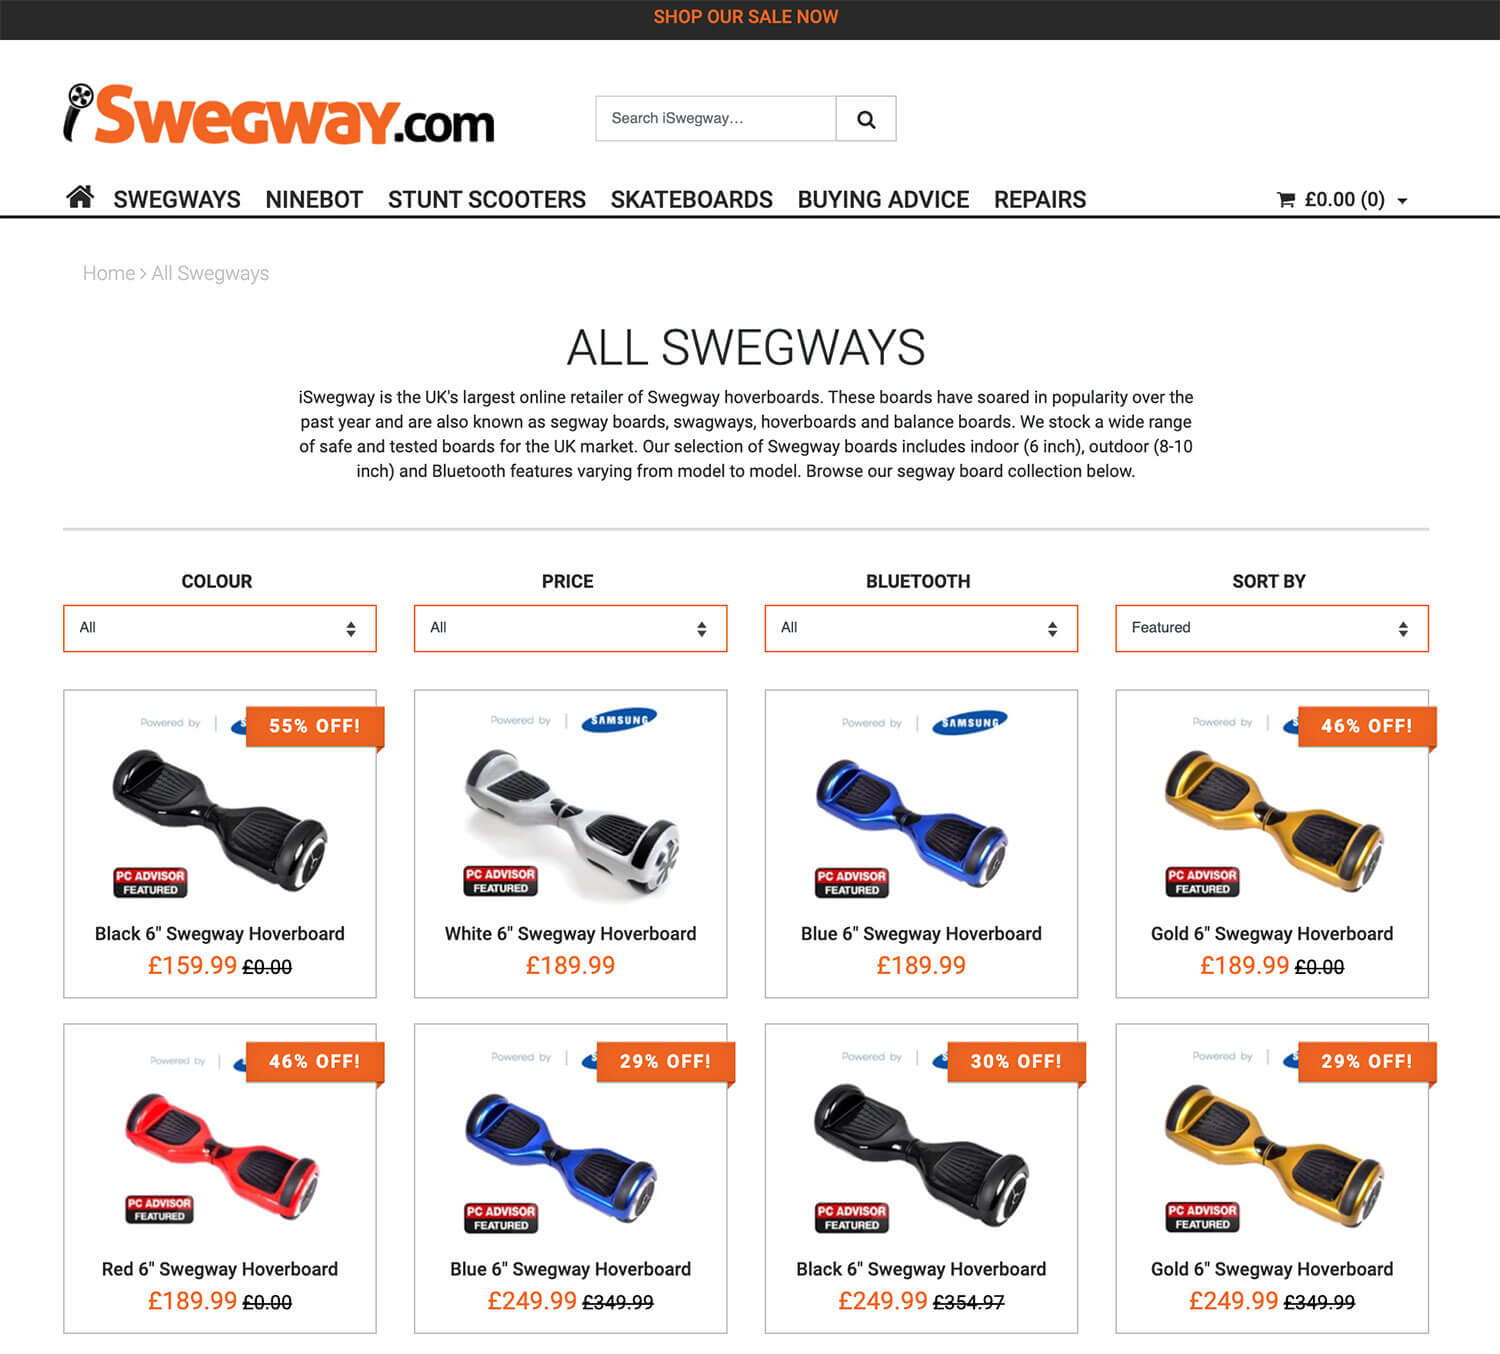 iSwegway category page